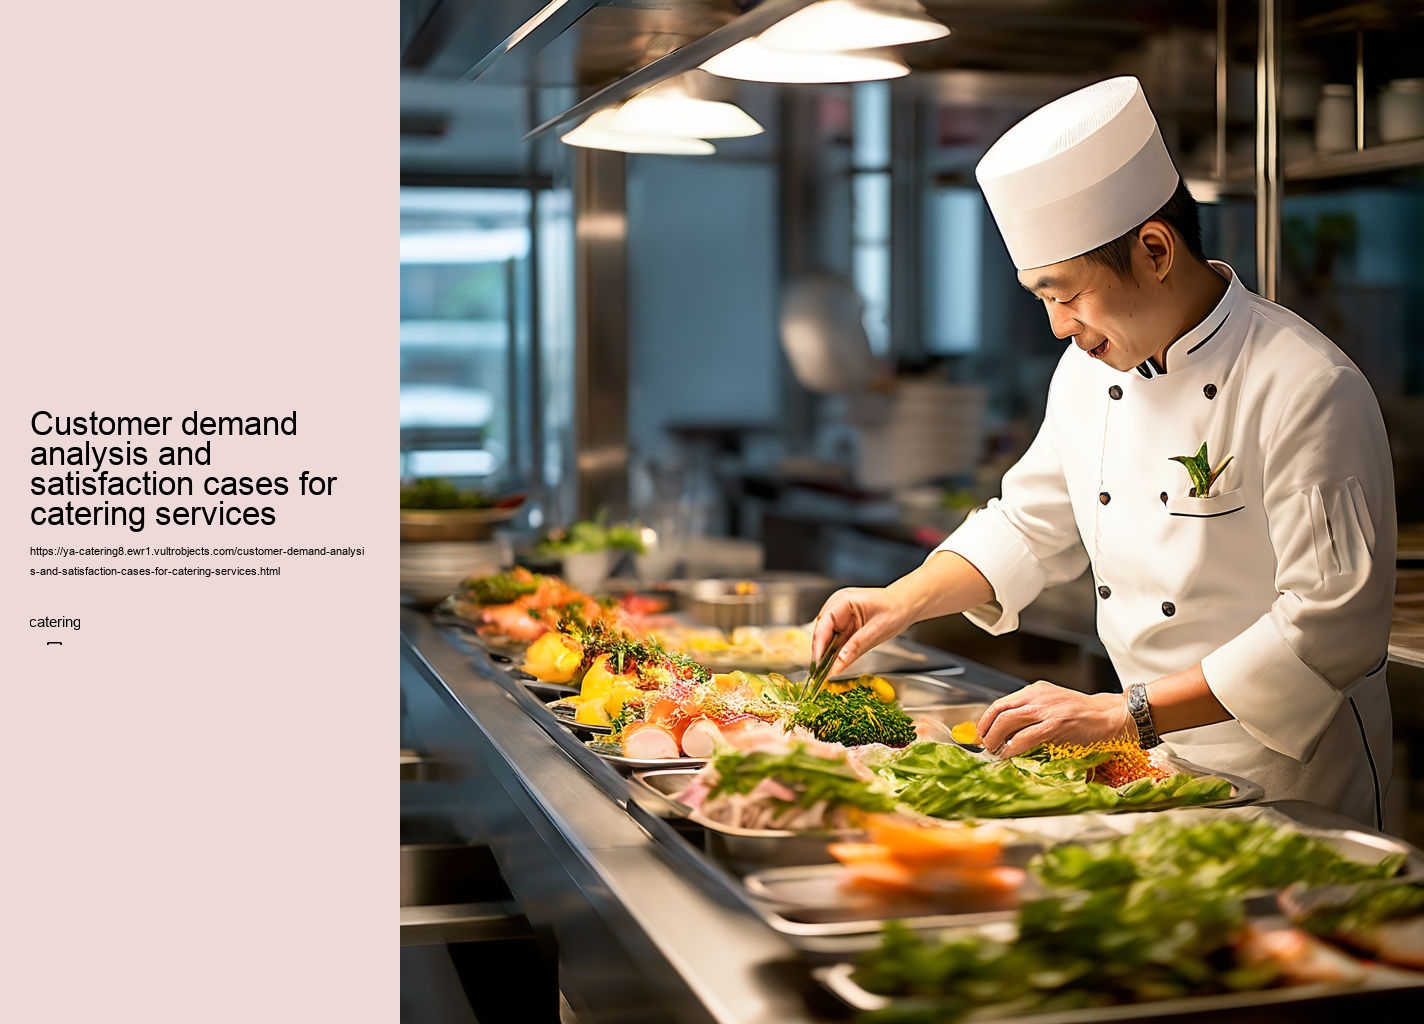 Customer demand analysis and satisfaction cases for catering services